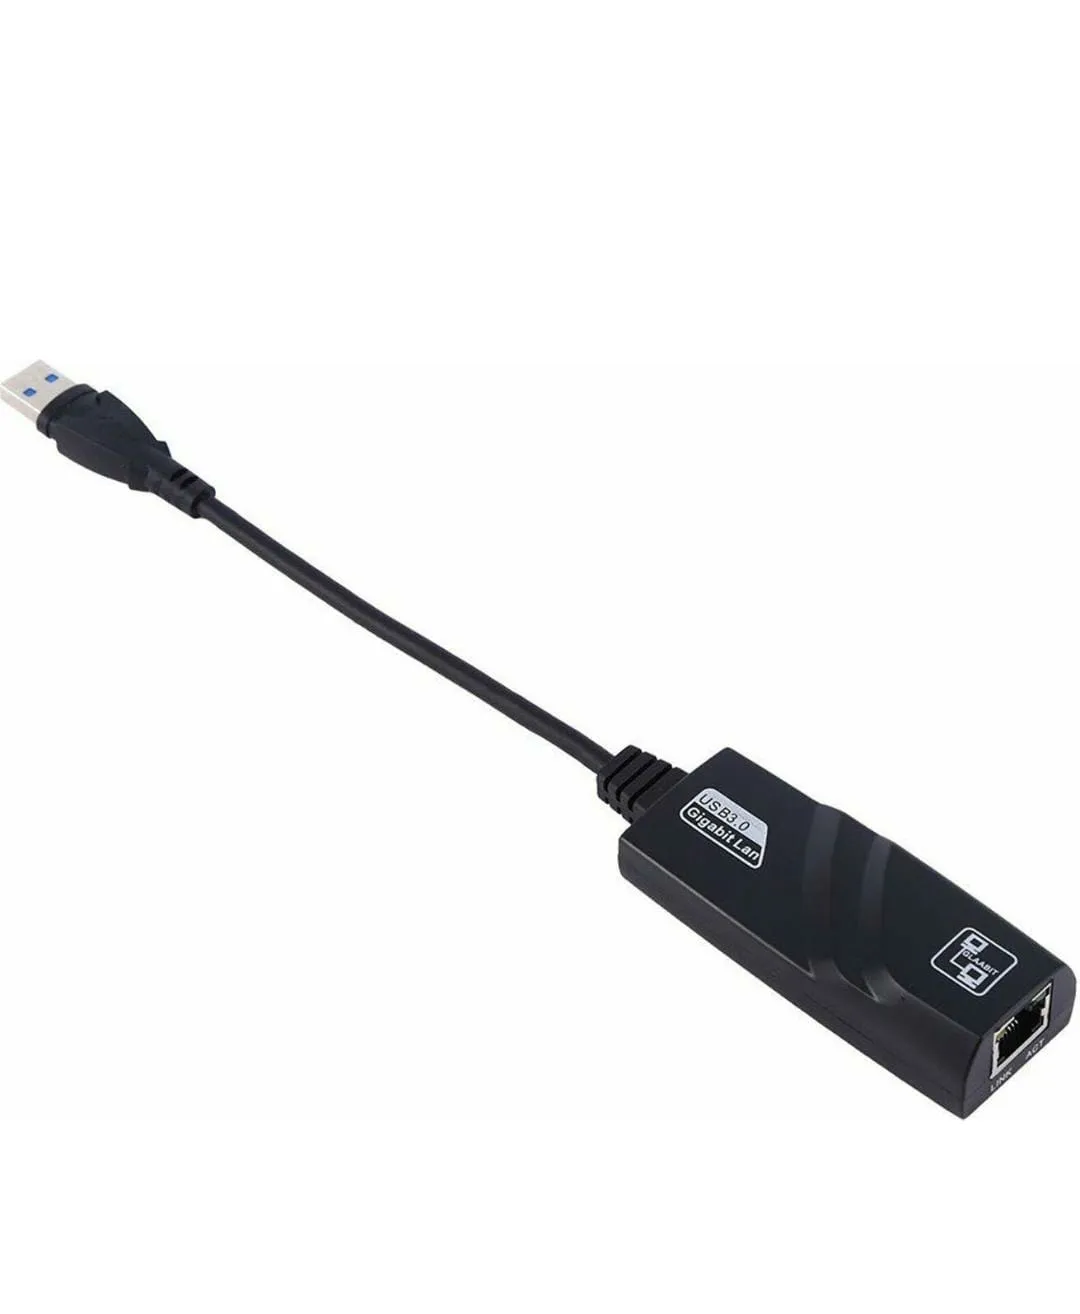 ETHERNET TO USB 3.0 1000 MPBS